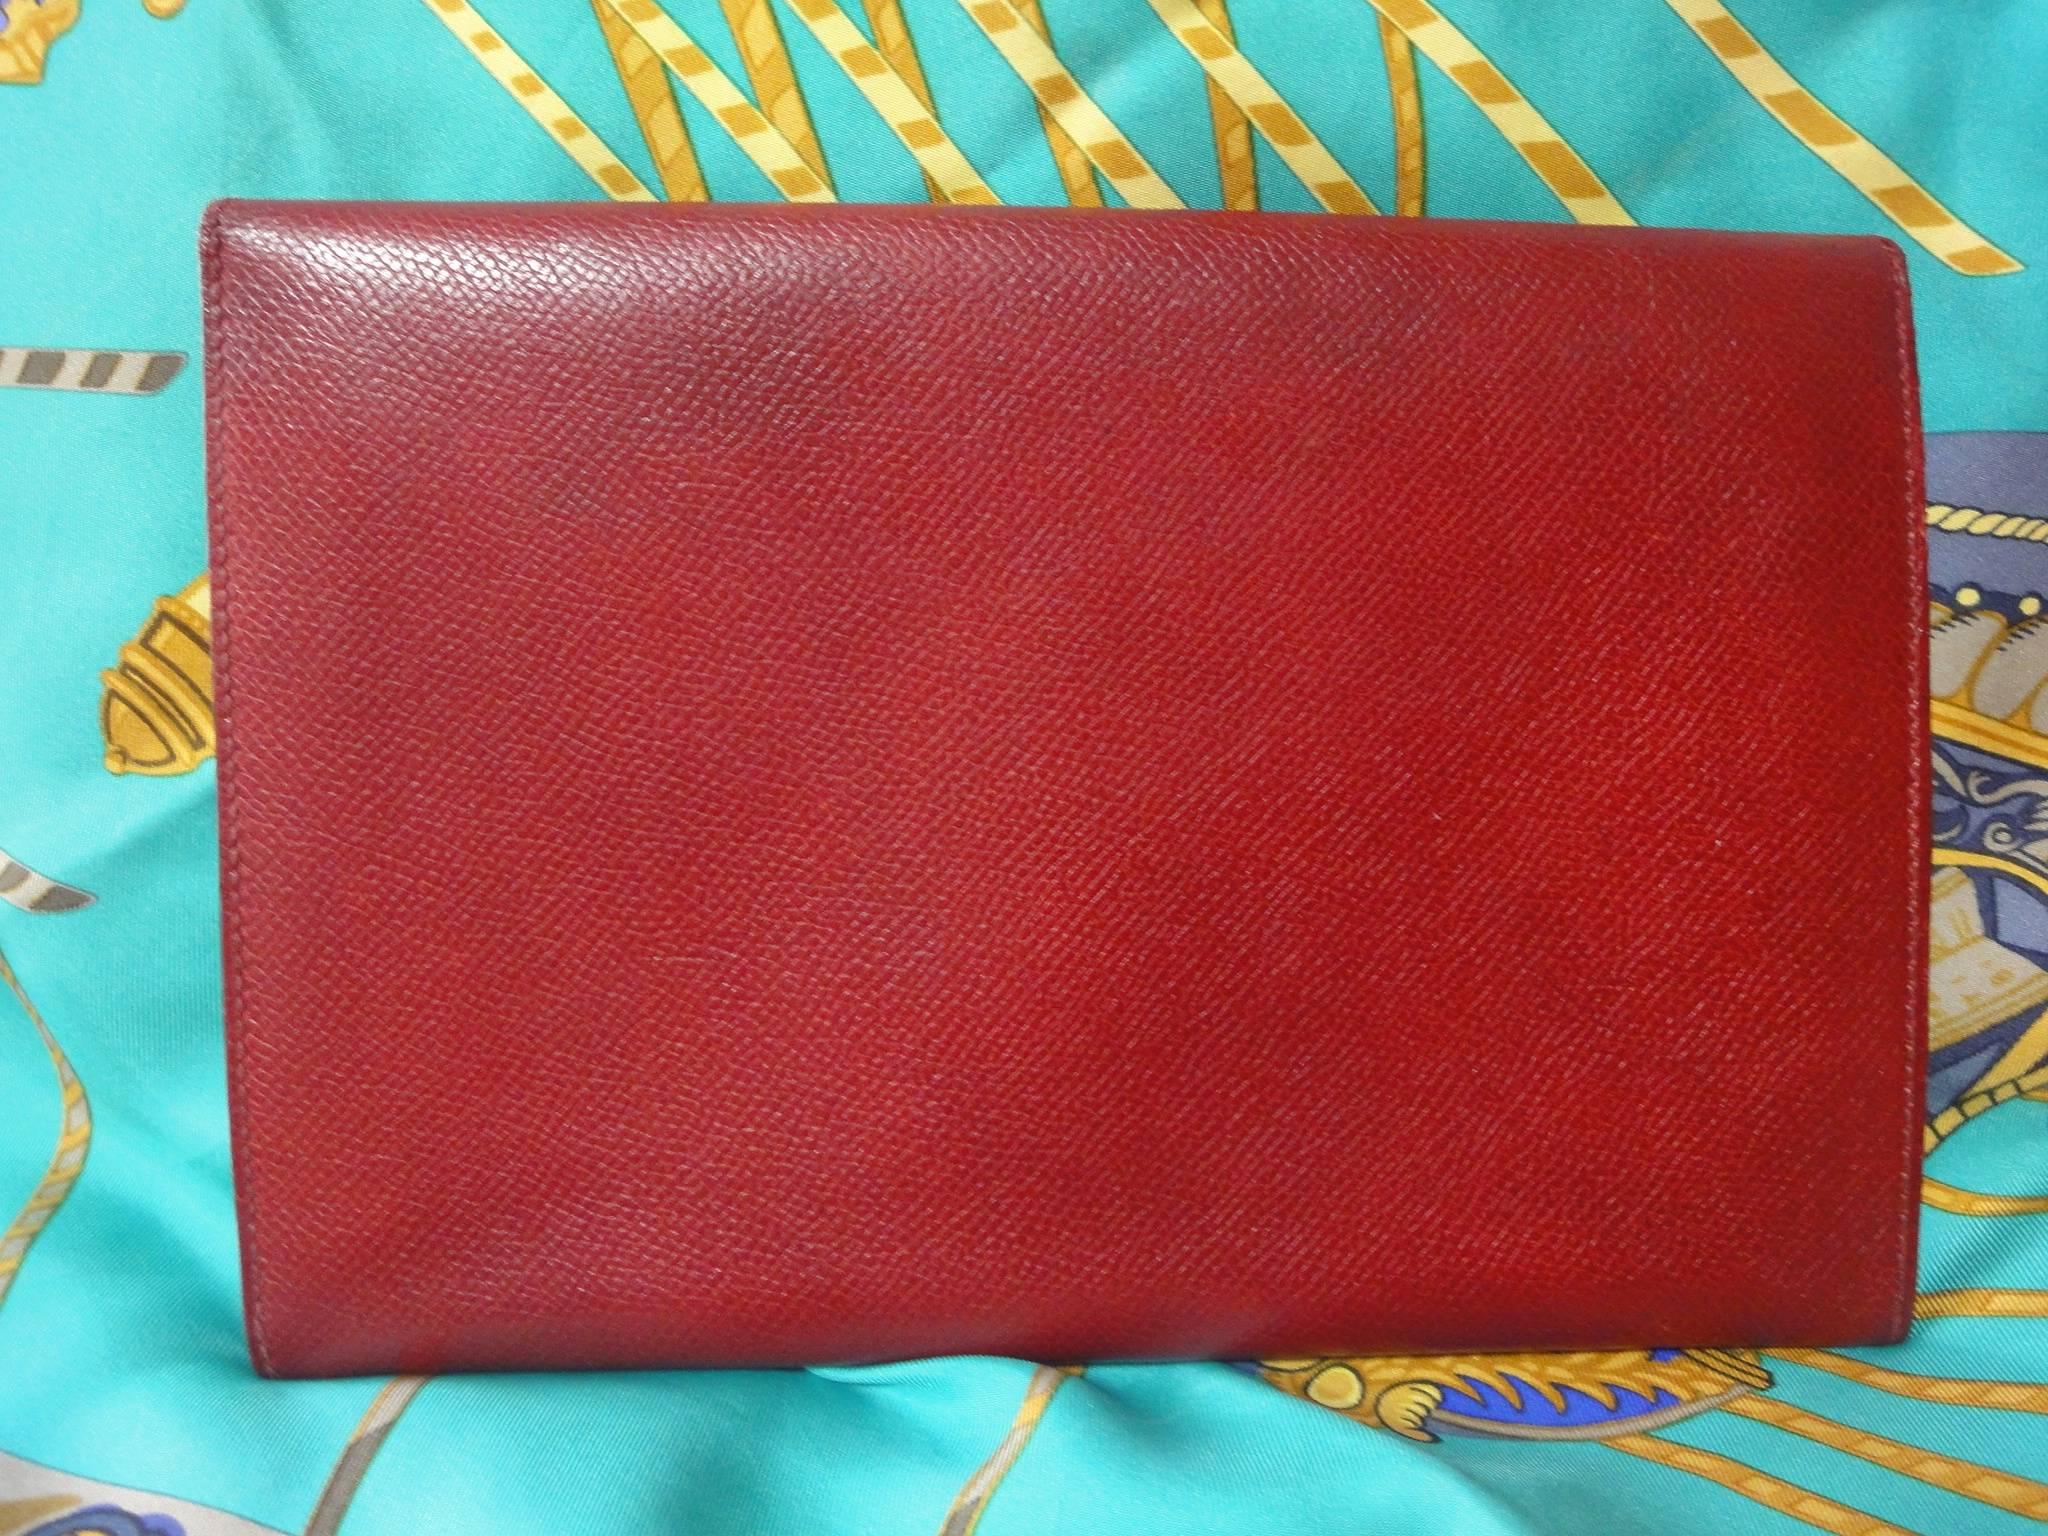 80s vintage HERMES brick red leather clutch pouch. 

Classic and sophisticated style for unisex.
This is a vintage HERMES leather clutch case pouch in brick red color.

Great masterpiece that can be used as a wallet, pouch, clutch bag, cosmetic